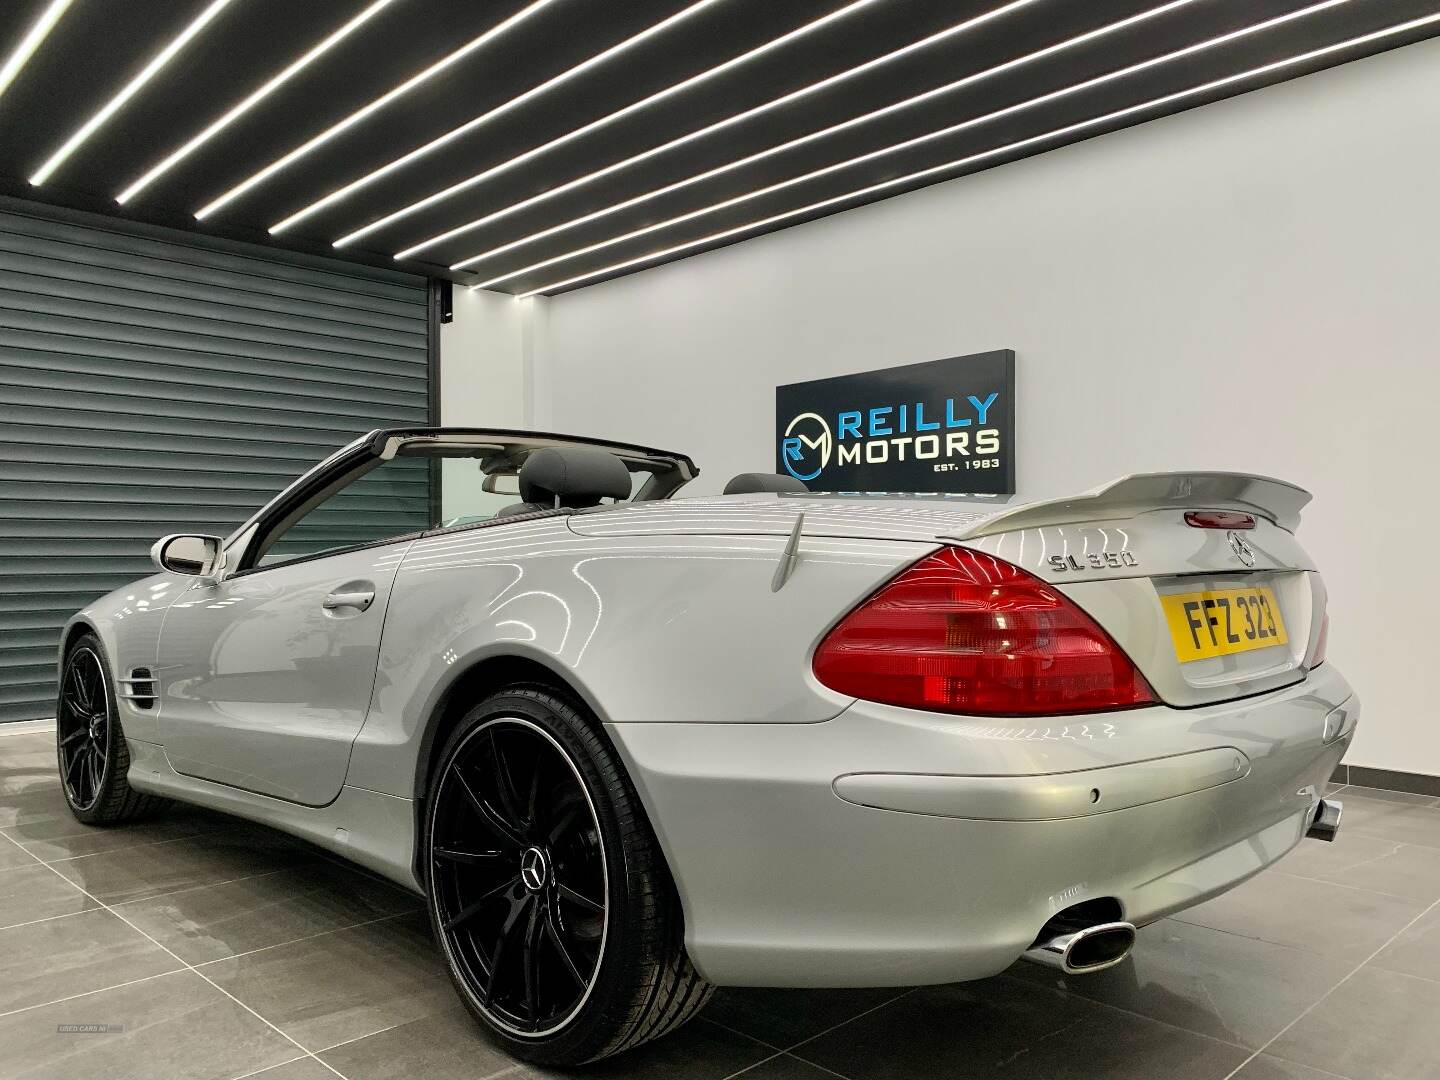 Mercedes SL CONVERTIBLE in Derry / Londonderry